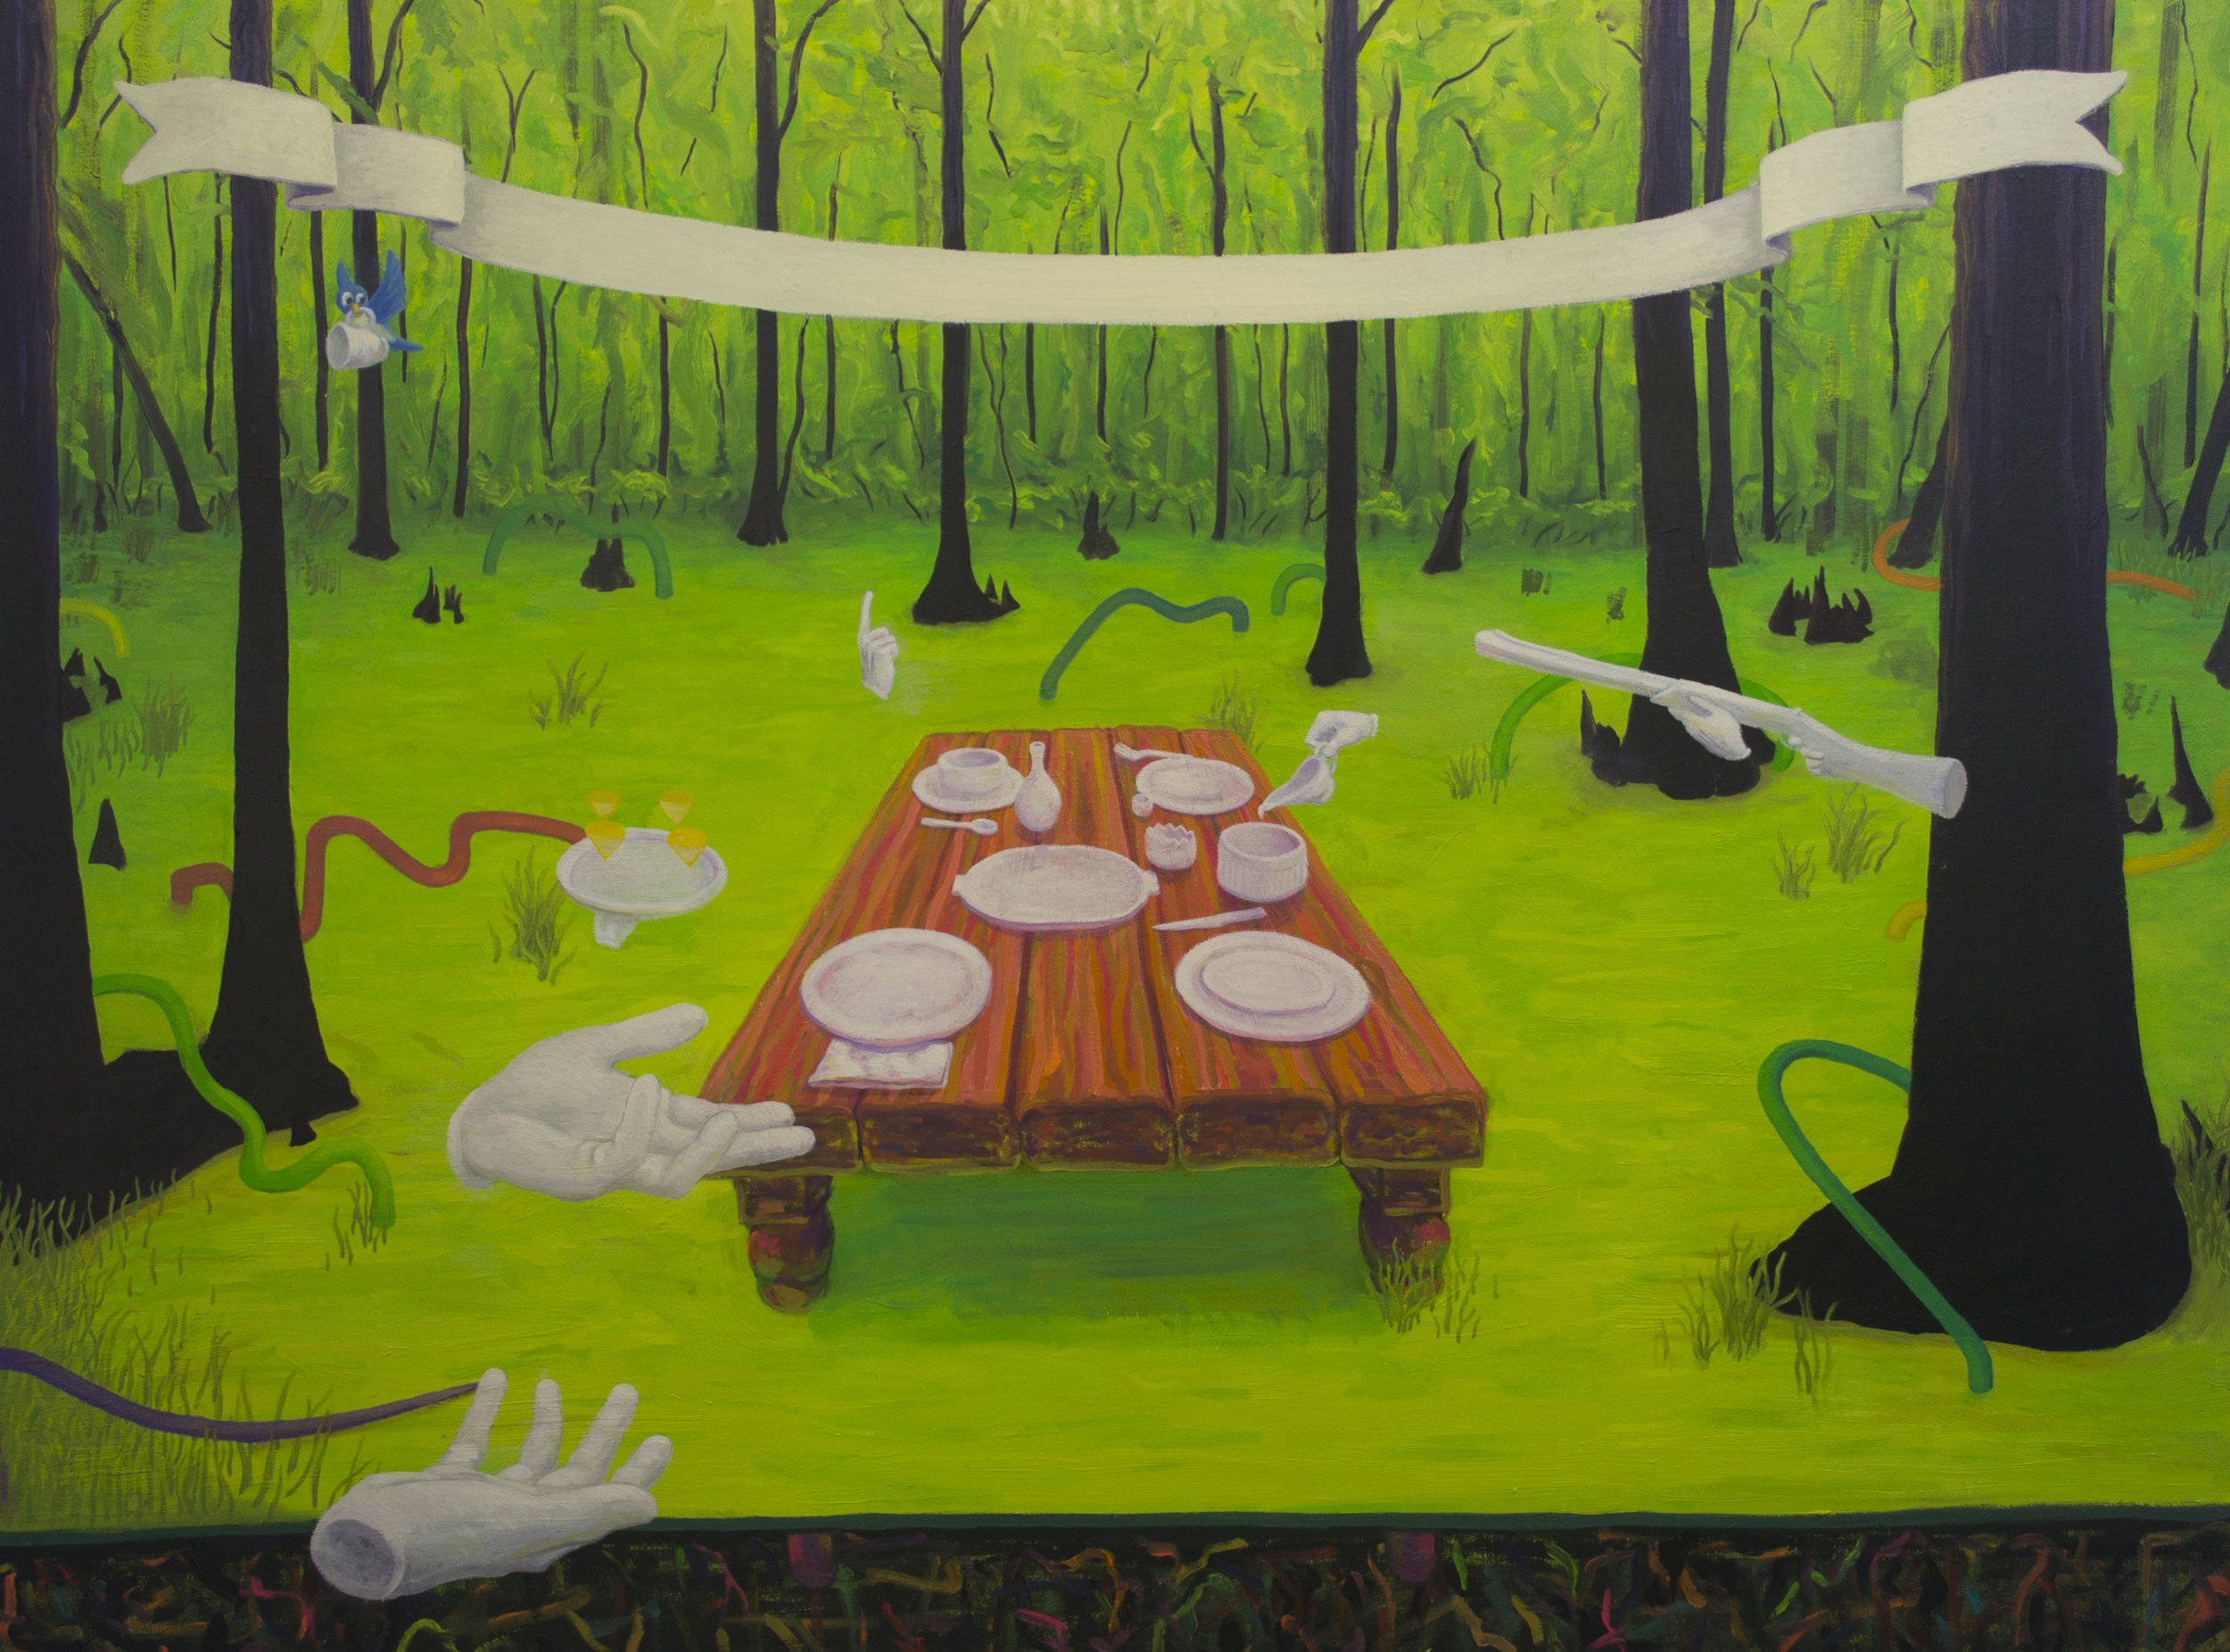  Dinner in the swamp  oil on canvas, 36” x 48”, 2019 